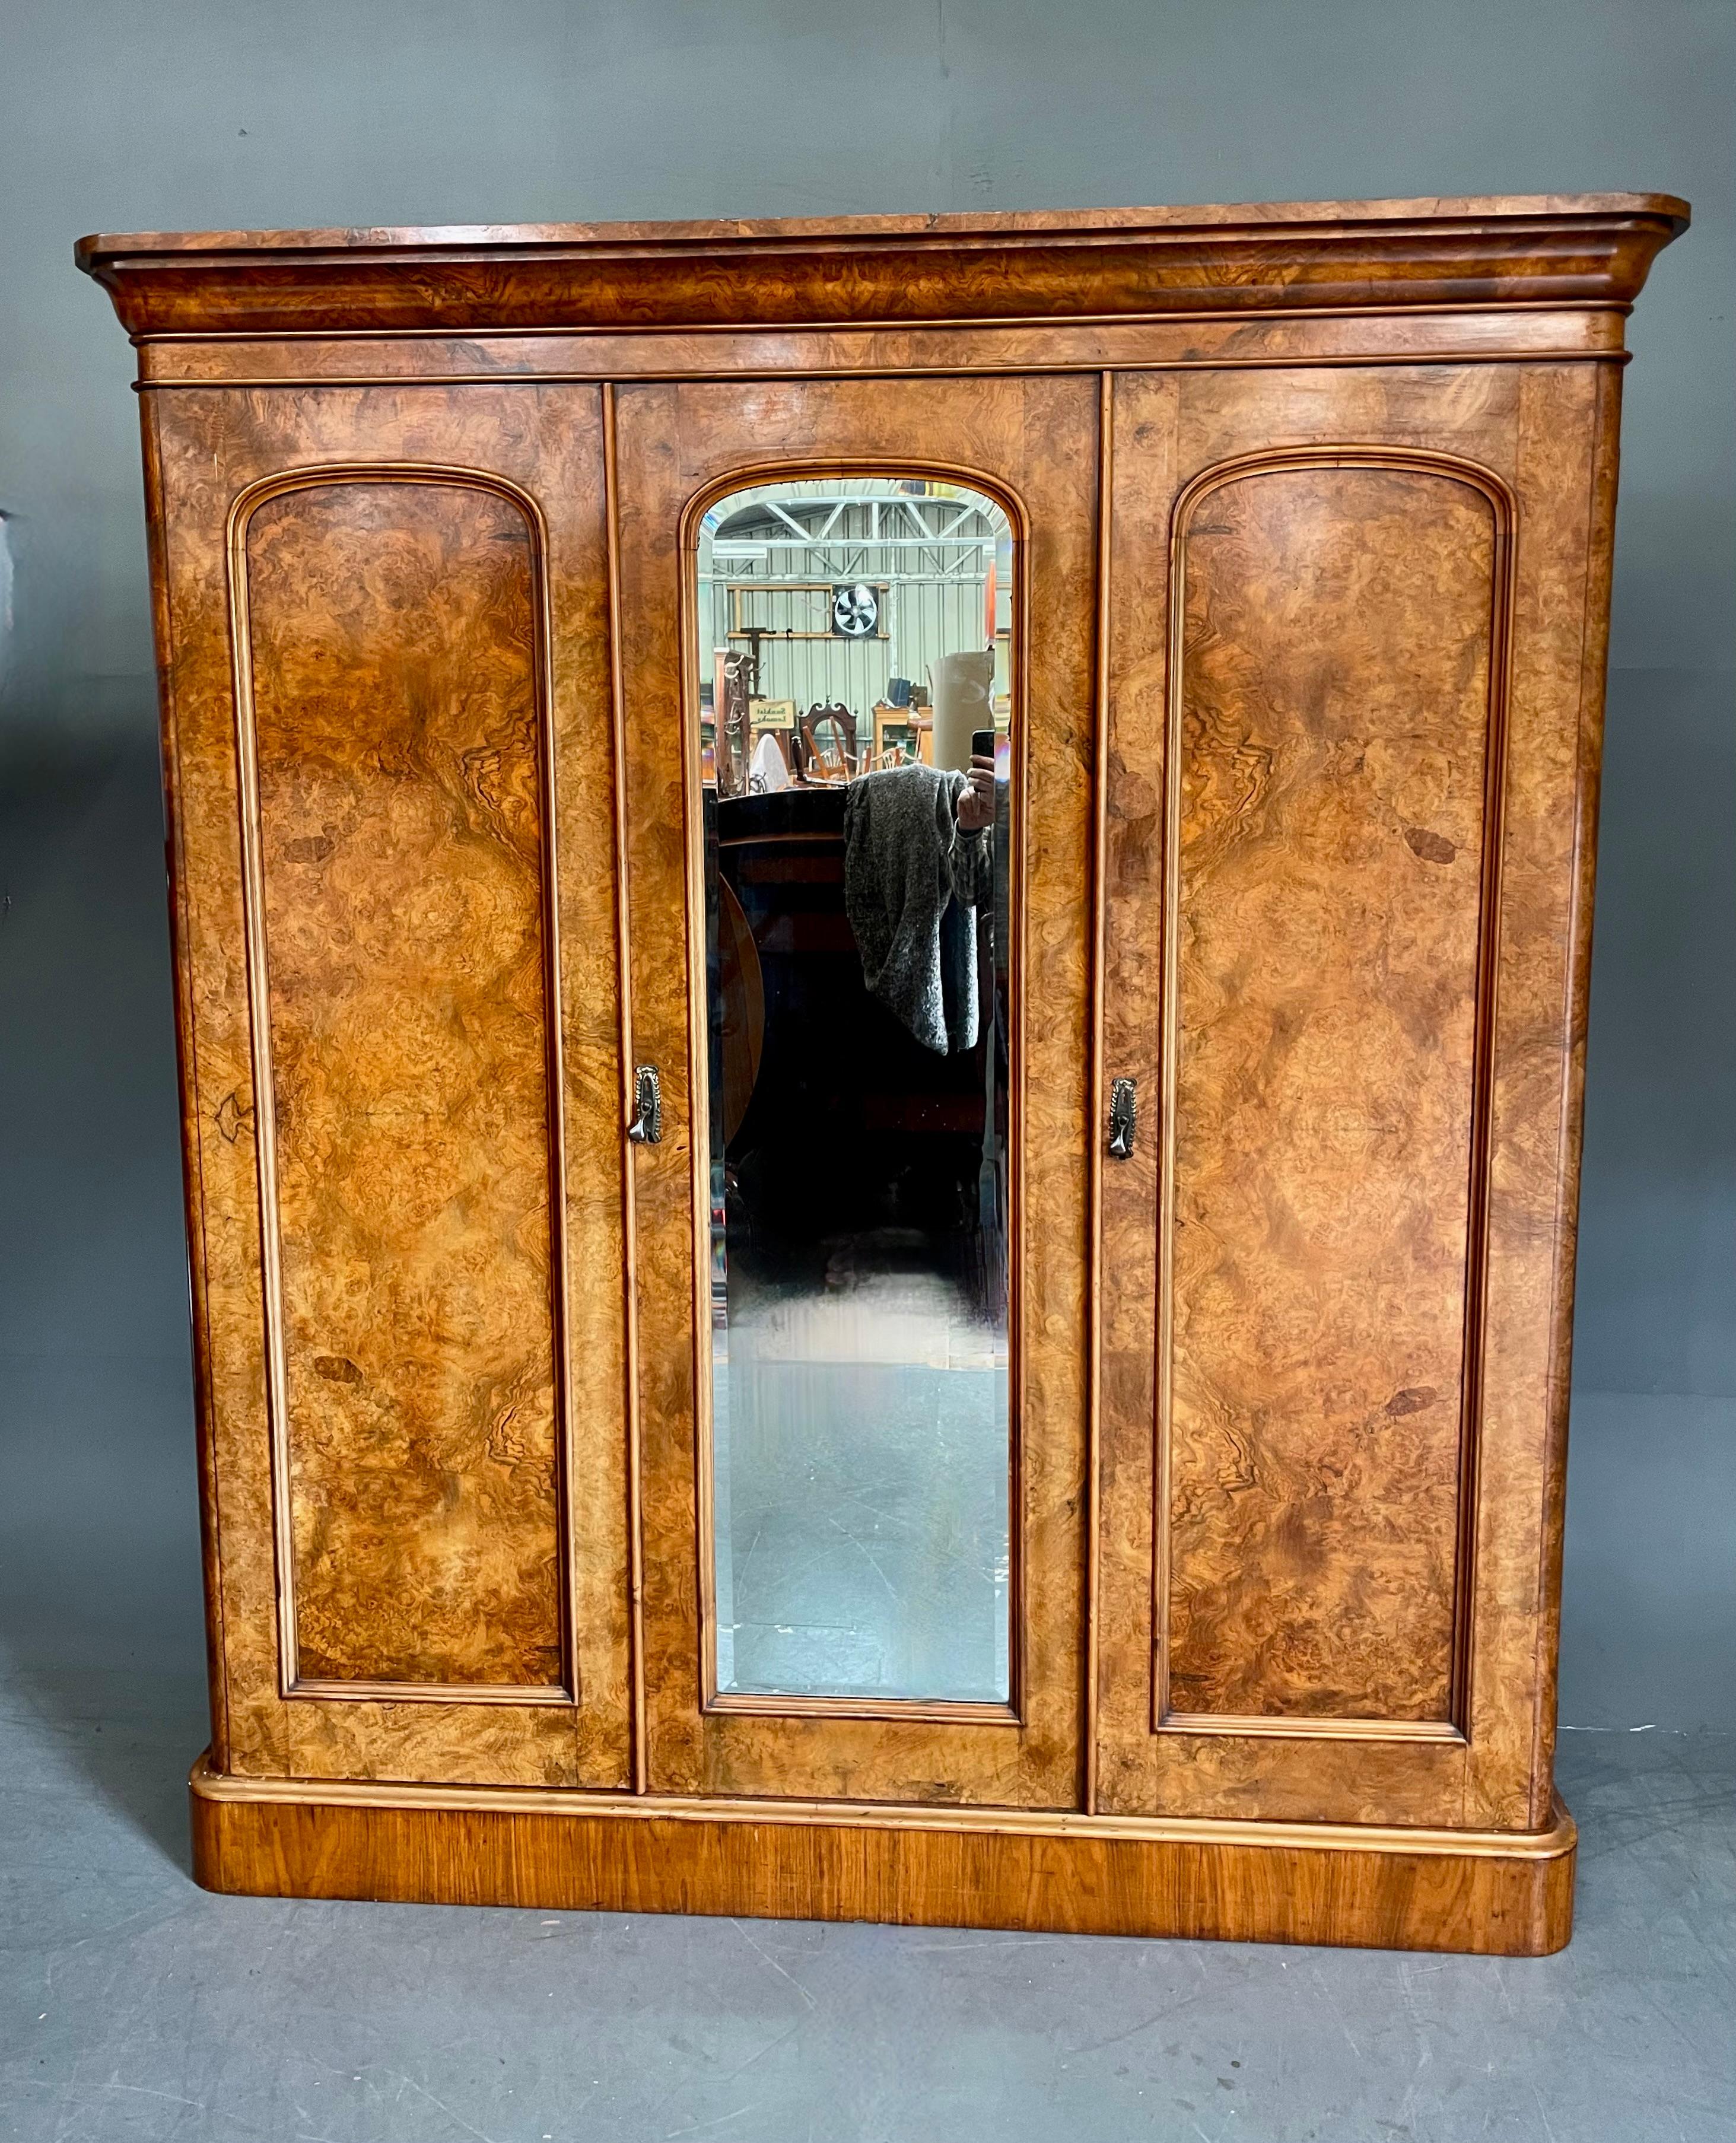 Fine quality Victorian burr walnut triple wardrobe .circa 1860 .
The wardrobe is a fantastic colour with an amazing grain .It is in very good original condition still retaining its original linings .
Each end section has a single hanging rail and